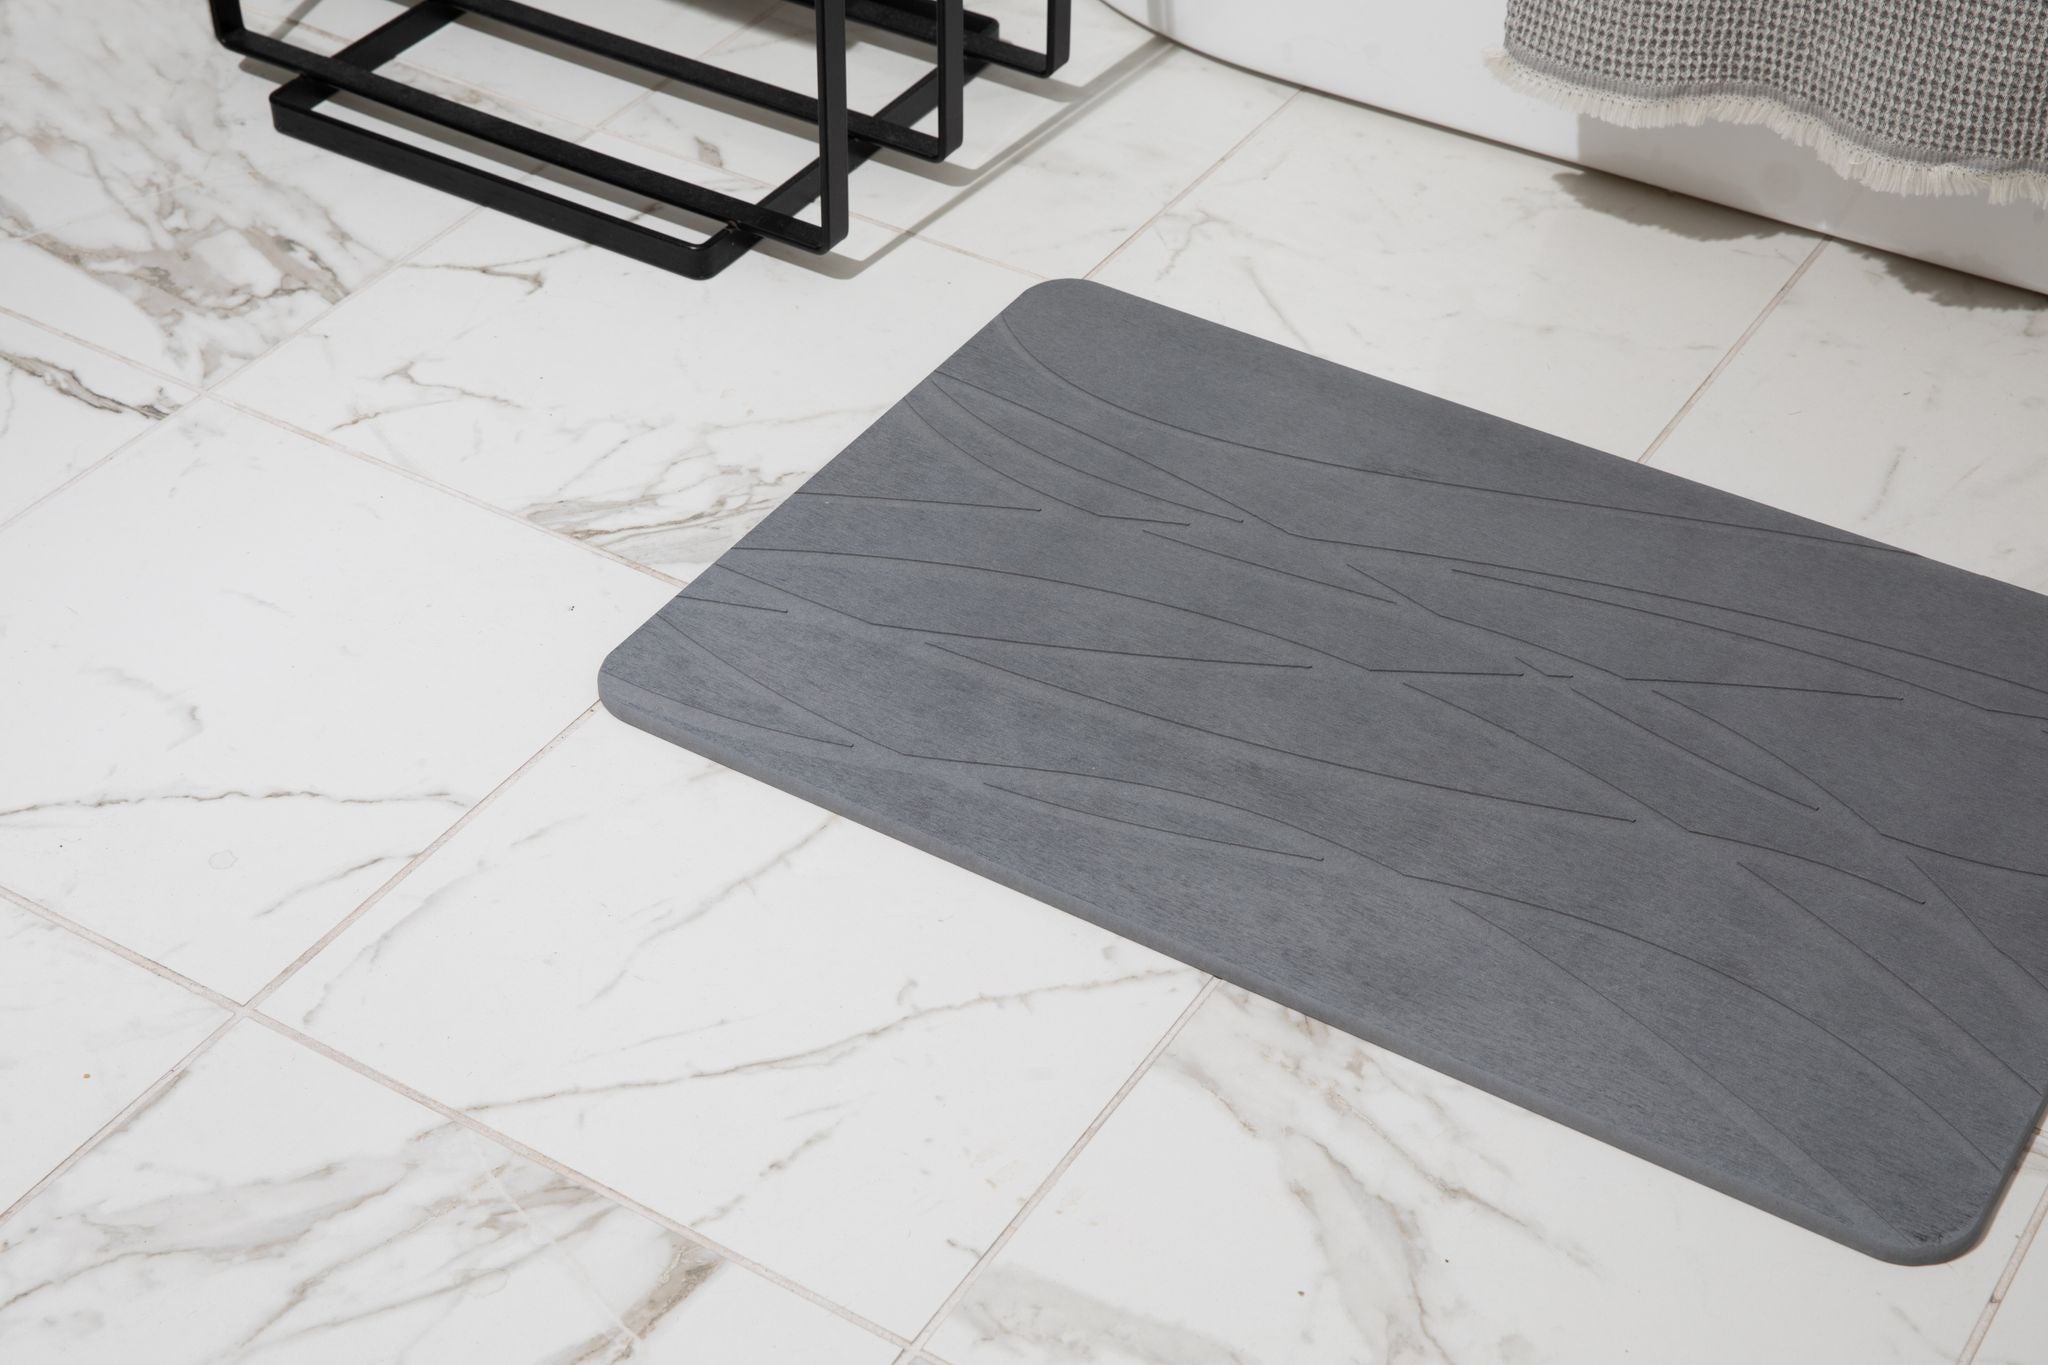  PHUKEMAT Stone Bath Mat - Natural Diatomaceous Earth Material  with Excellent Water Absorption and Moisture-Wicking Properties, Durable,  Slip-Resistant, and Eco-Friendly Design (Zen Dolomite) : Home & Kitchen